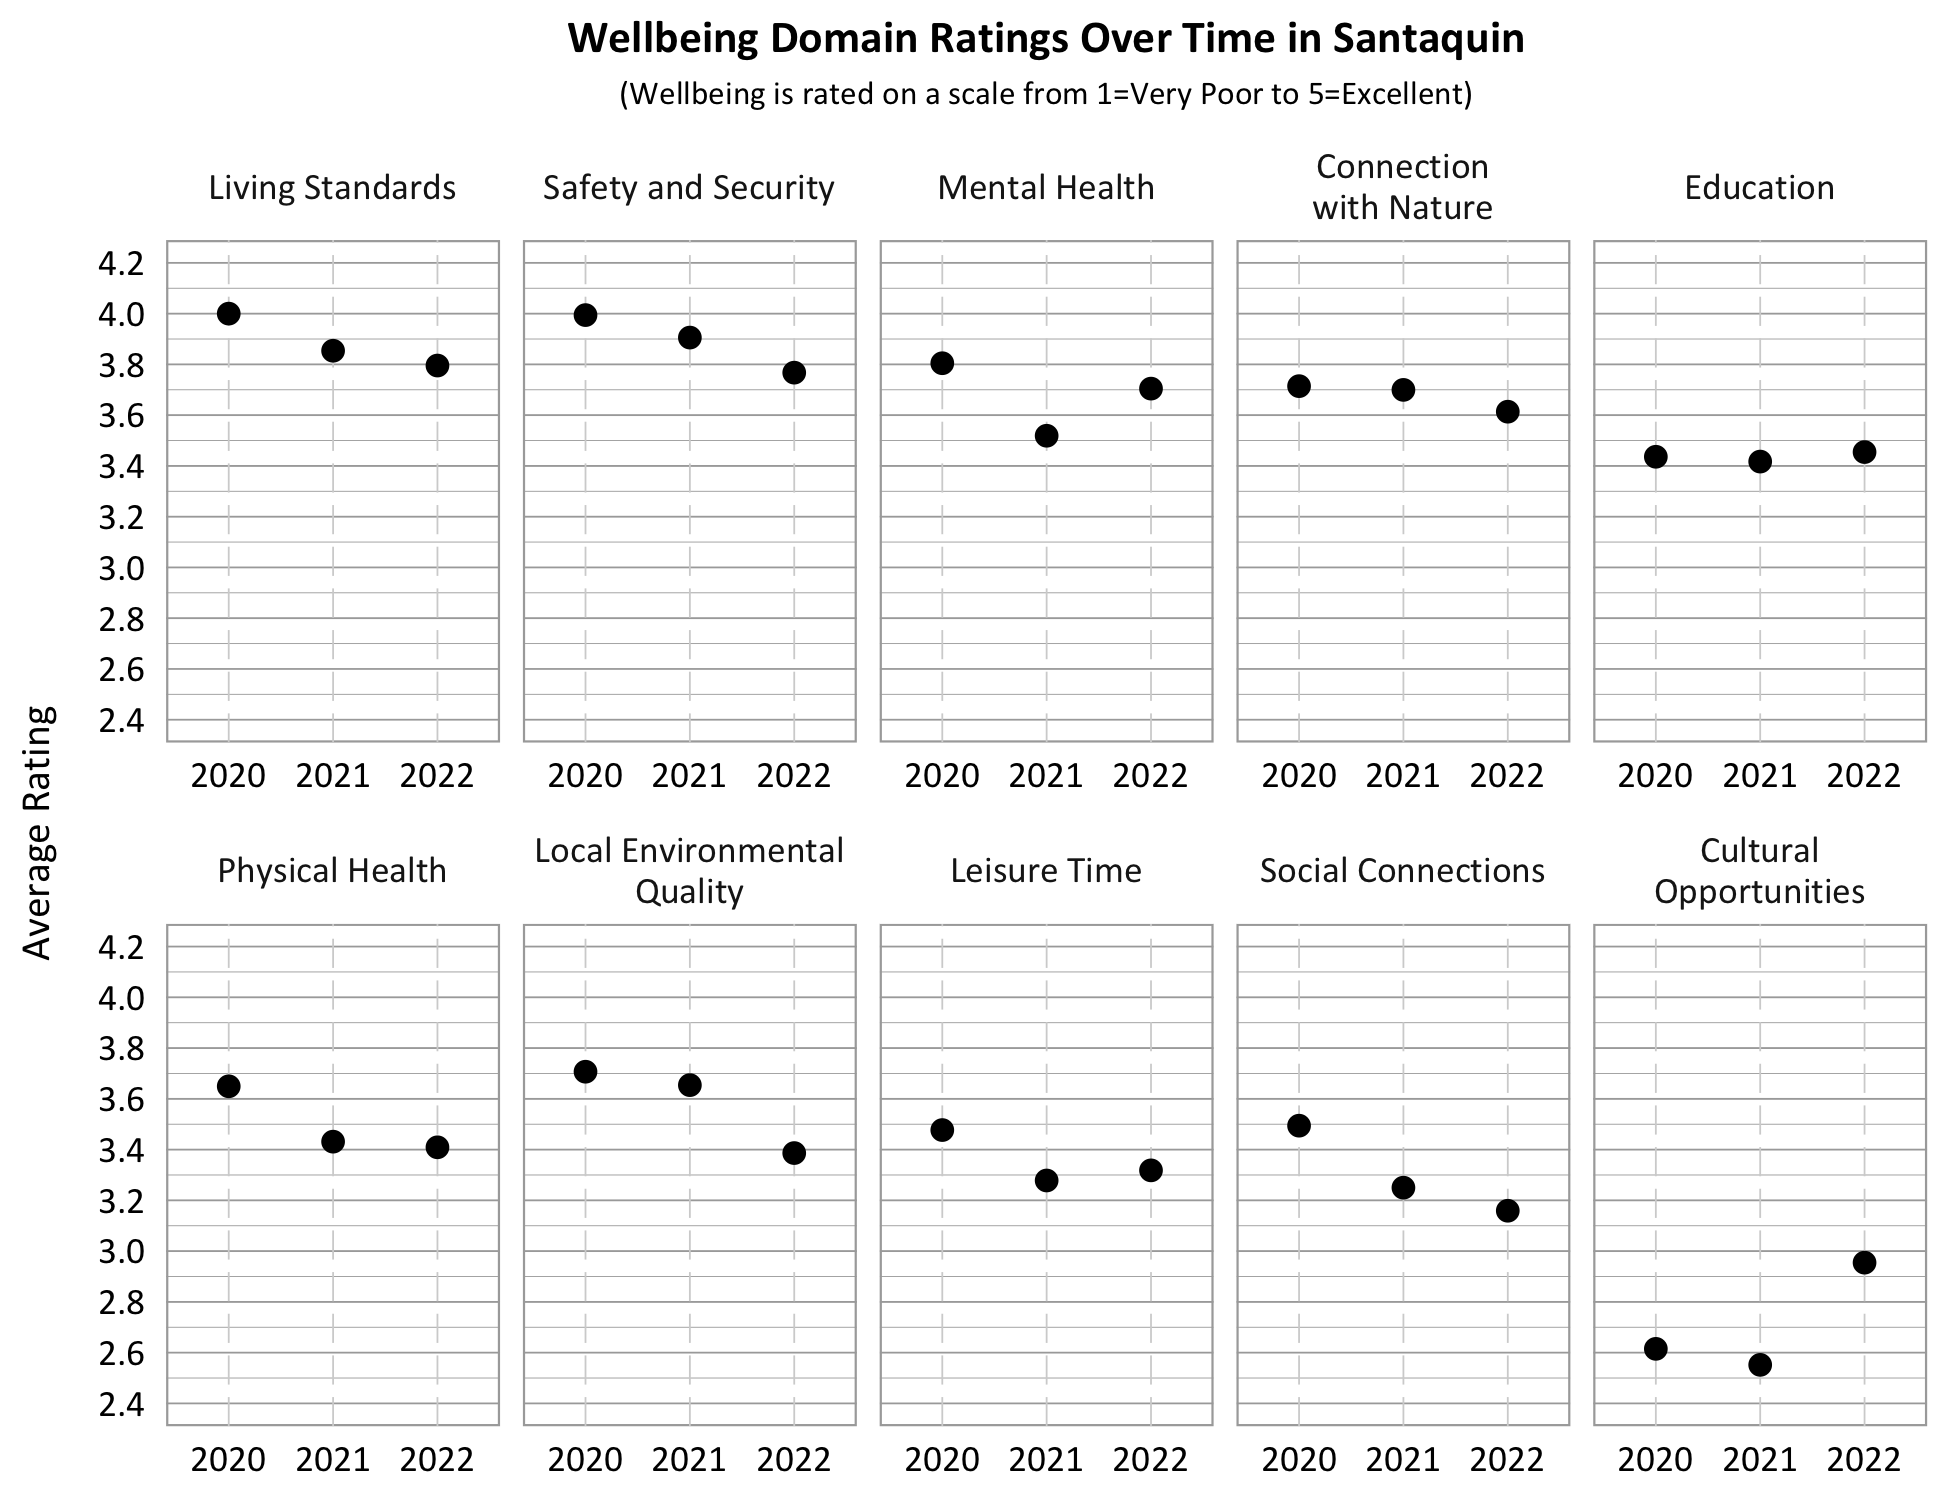 Dot Plot. Title: Wellbeing Domain Ratings Over Time in Santaquin, Subtitle: Wellbeing is rated on a scale from 1=Very Poor to 5=Excellent. Category: Living Standards- 2020- 4.0, 2021- 3.9, 2022- 3.8; Category: Safety and Security- 2020- 4.0, 2021- 3.9, 2022- 3.8; Category: Connection with Nature- 2020- 3.7, 2021- 3.7, 2022- 3.6, Category: Education- 2020- 3.4, 2021- 3.4, 2022- 3.5; Category: Physical Health: 2020- 3.6, 2021- 3.4, 2022 3.4; Category: Mental Health- 2020- 3.8, 2021- 3.5, 2022- 3.7; Category: Local Environmental Quality- 2020- 3.7, 2021- 3.6, 2022- 3.4; Category: Leisure Time- 2020- 3.5, 2021- 3.3, 2022- 3.3, Category: Social Connections- 2020- 3.5, 2021- 3.25; 2022- 3.15, Category: Cultural Opportunities- 2020- 2.6, 2021- 2.6, 2022- 3.0. 